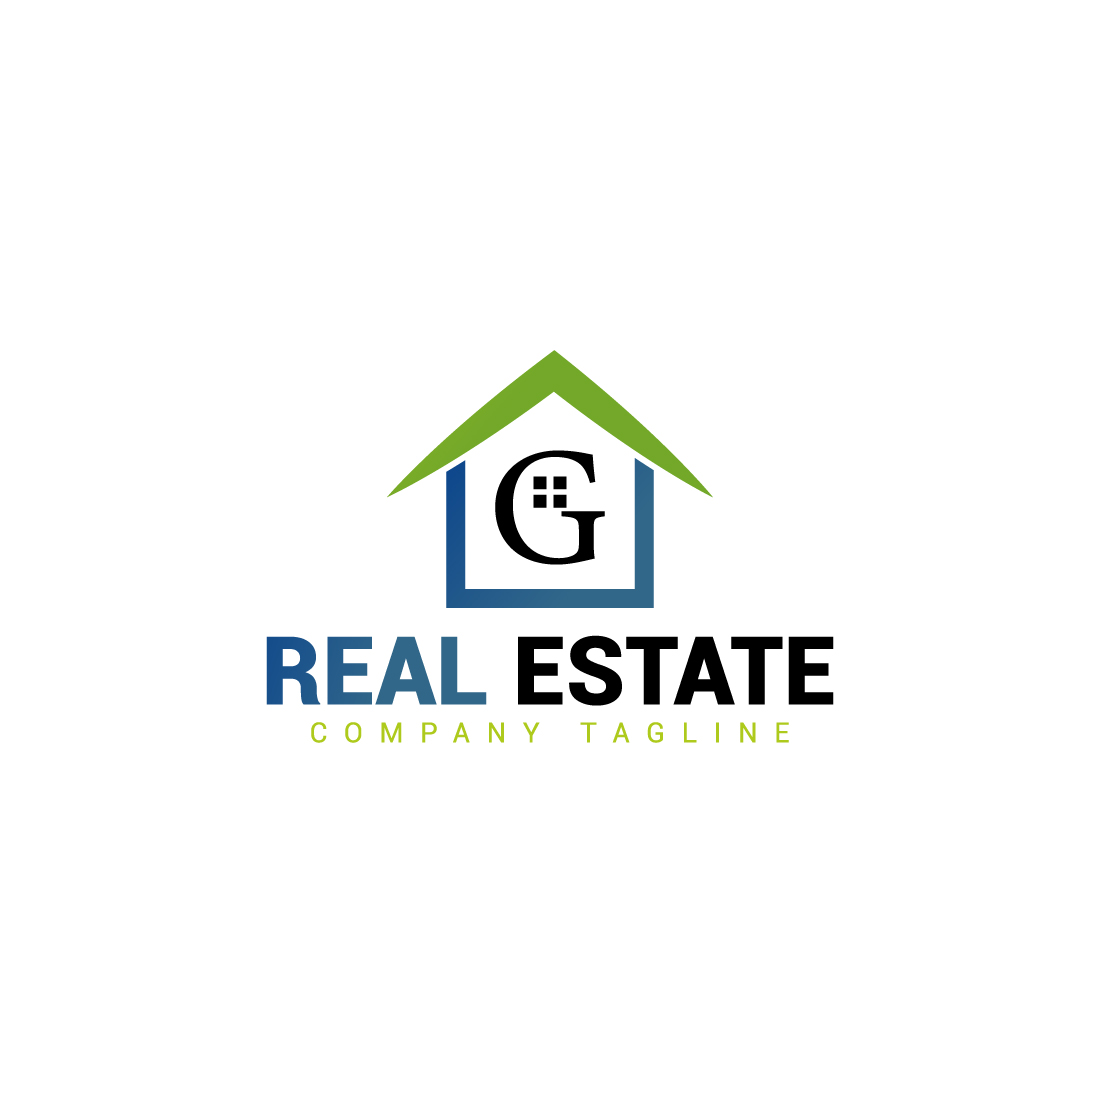 Real estate logo with green, dark blue color and G letter cover image.